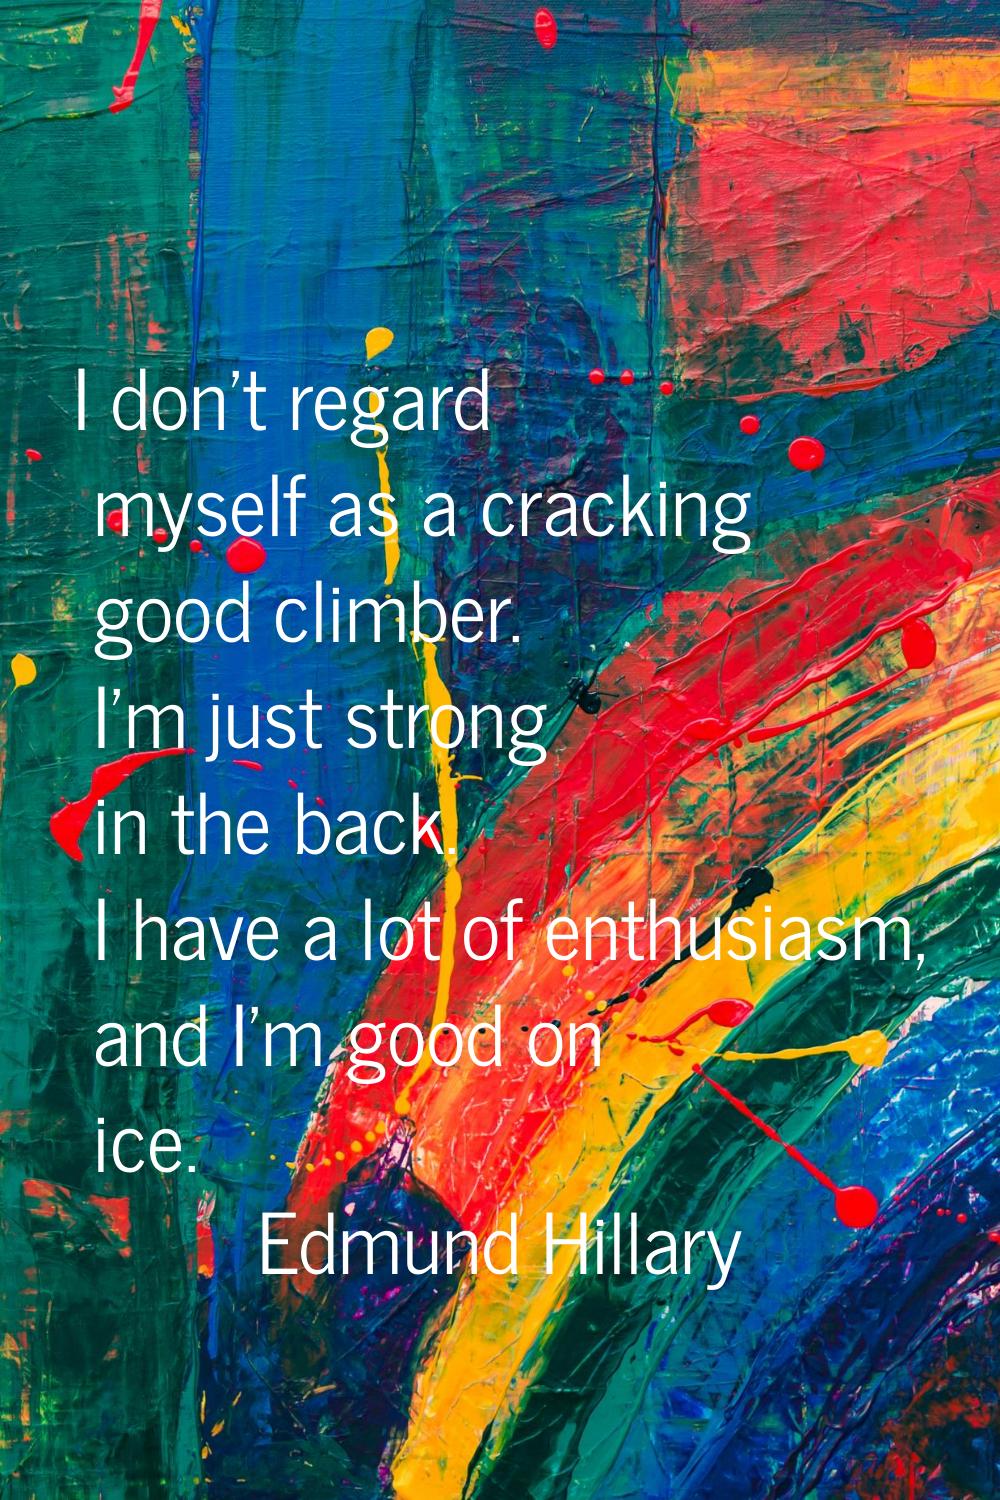 I don't regard myself as a cracking good climber. I'm just strong in the back. I have a lot of enth